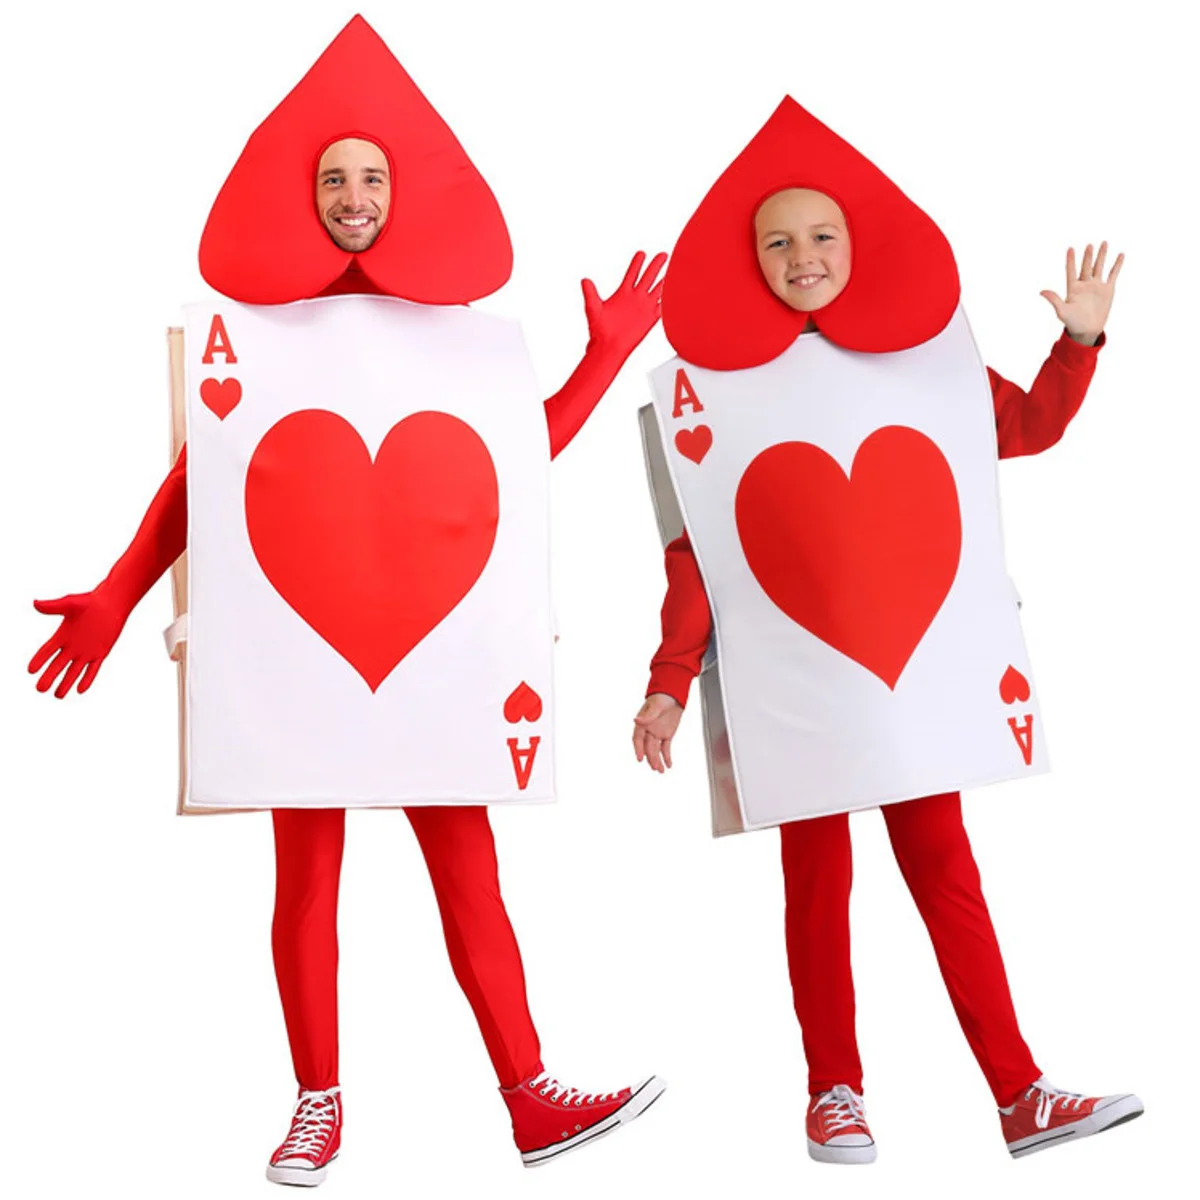 halloween-cosplay-unisex-parent-child-ace-of-hearts-poker-playing-card-costume-for-kids-child-adult-tunic-hat-suit